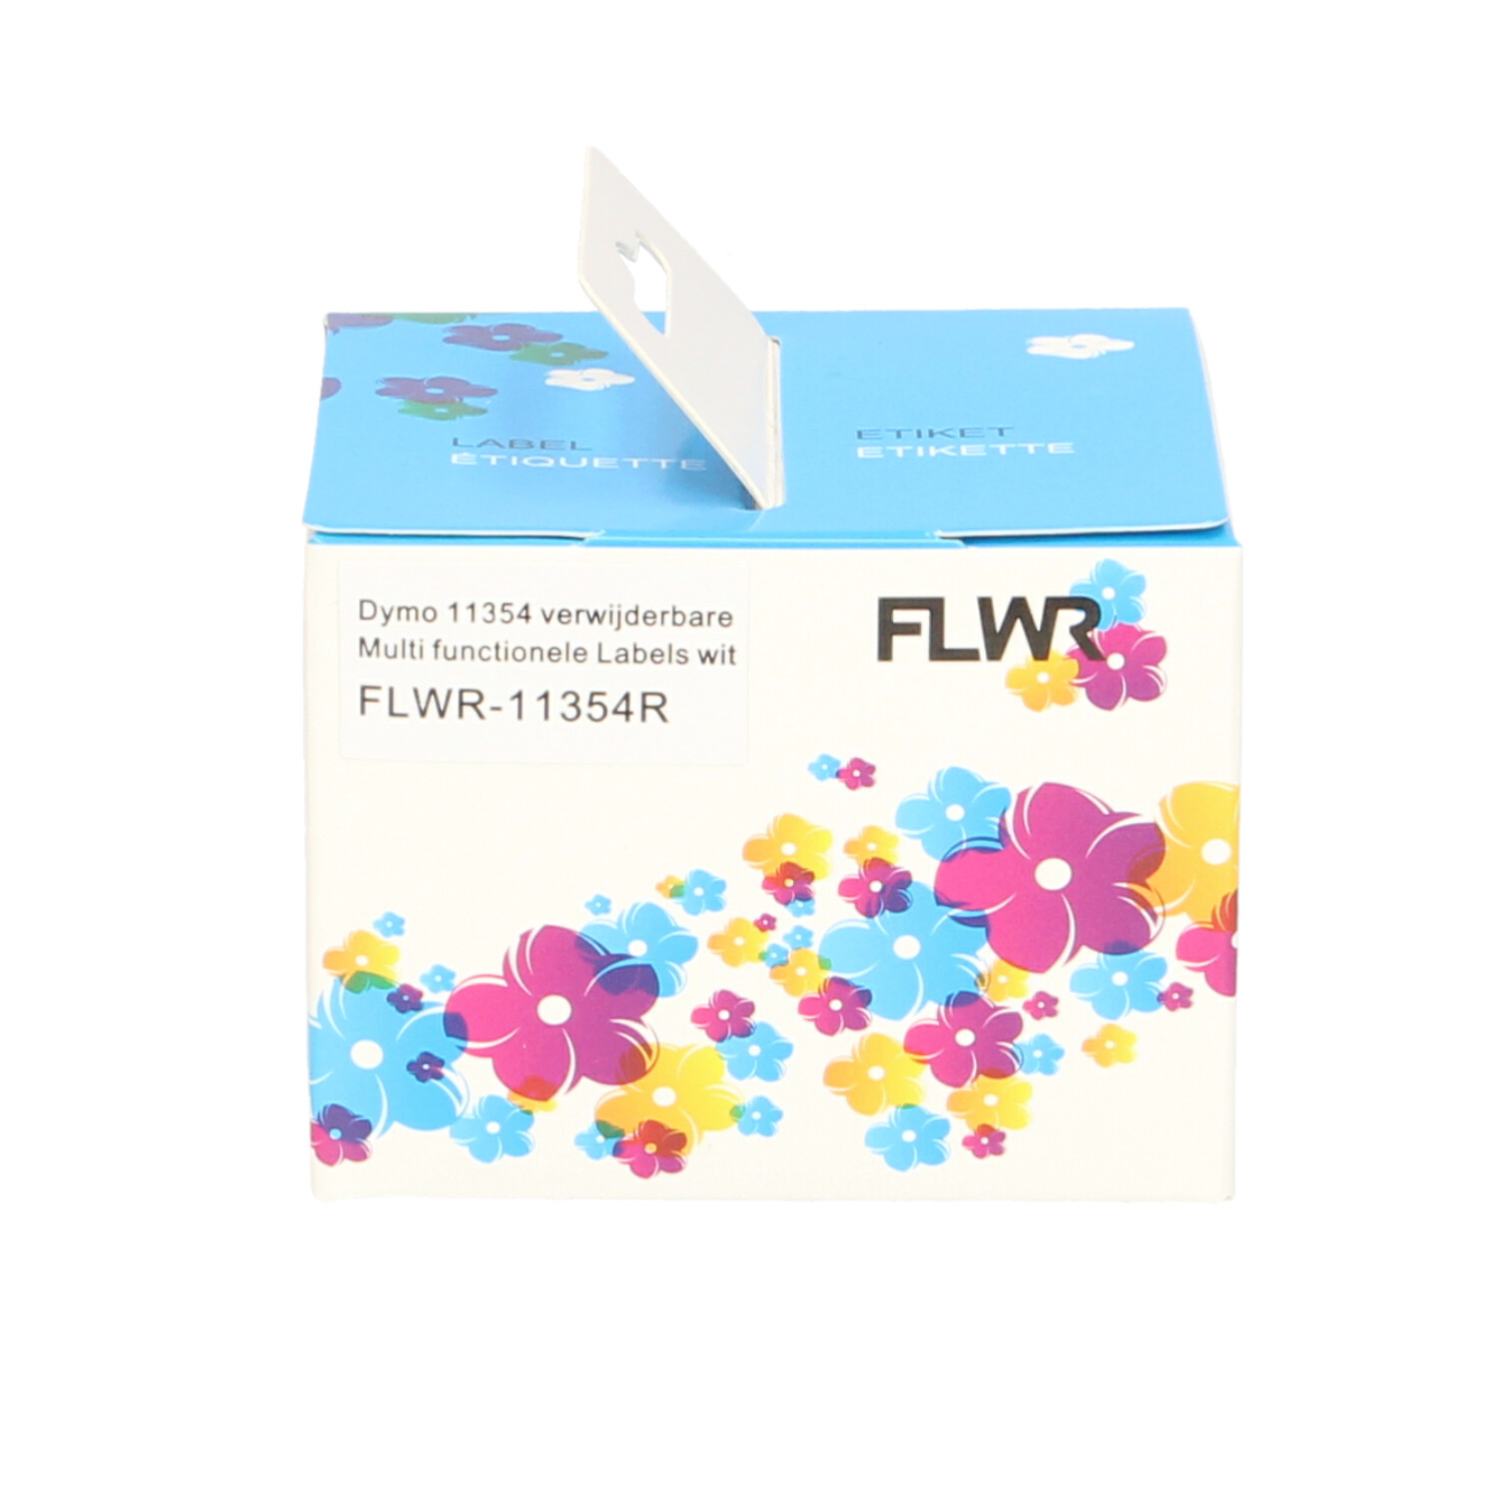 FLWR Dymo  11354R verwijderbare Multi functionele labels 57 mm x 32 mm  wit